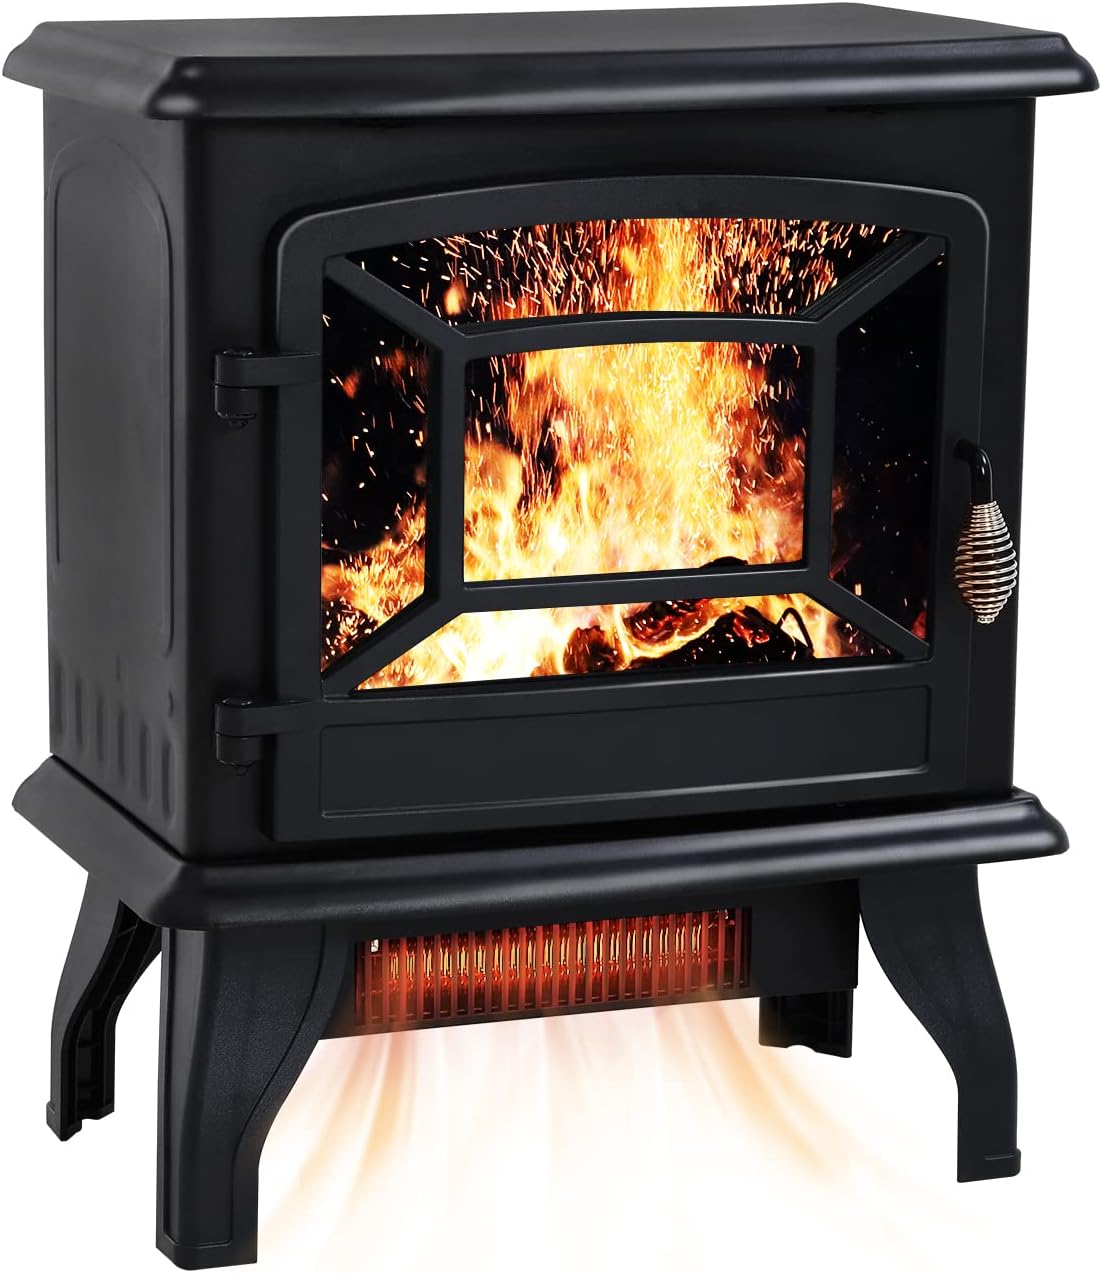 Electric Fireplace, Electric Fireplace Heater 3D Flames Freestanding TV Stand Fireplace Stove CSA Approved Safety 1500W Realistic Log Flame for Indoor Use(Black)